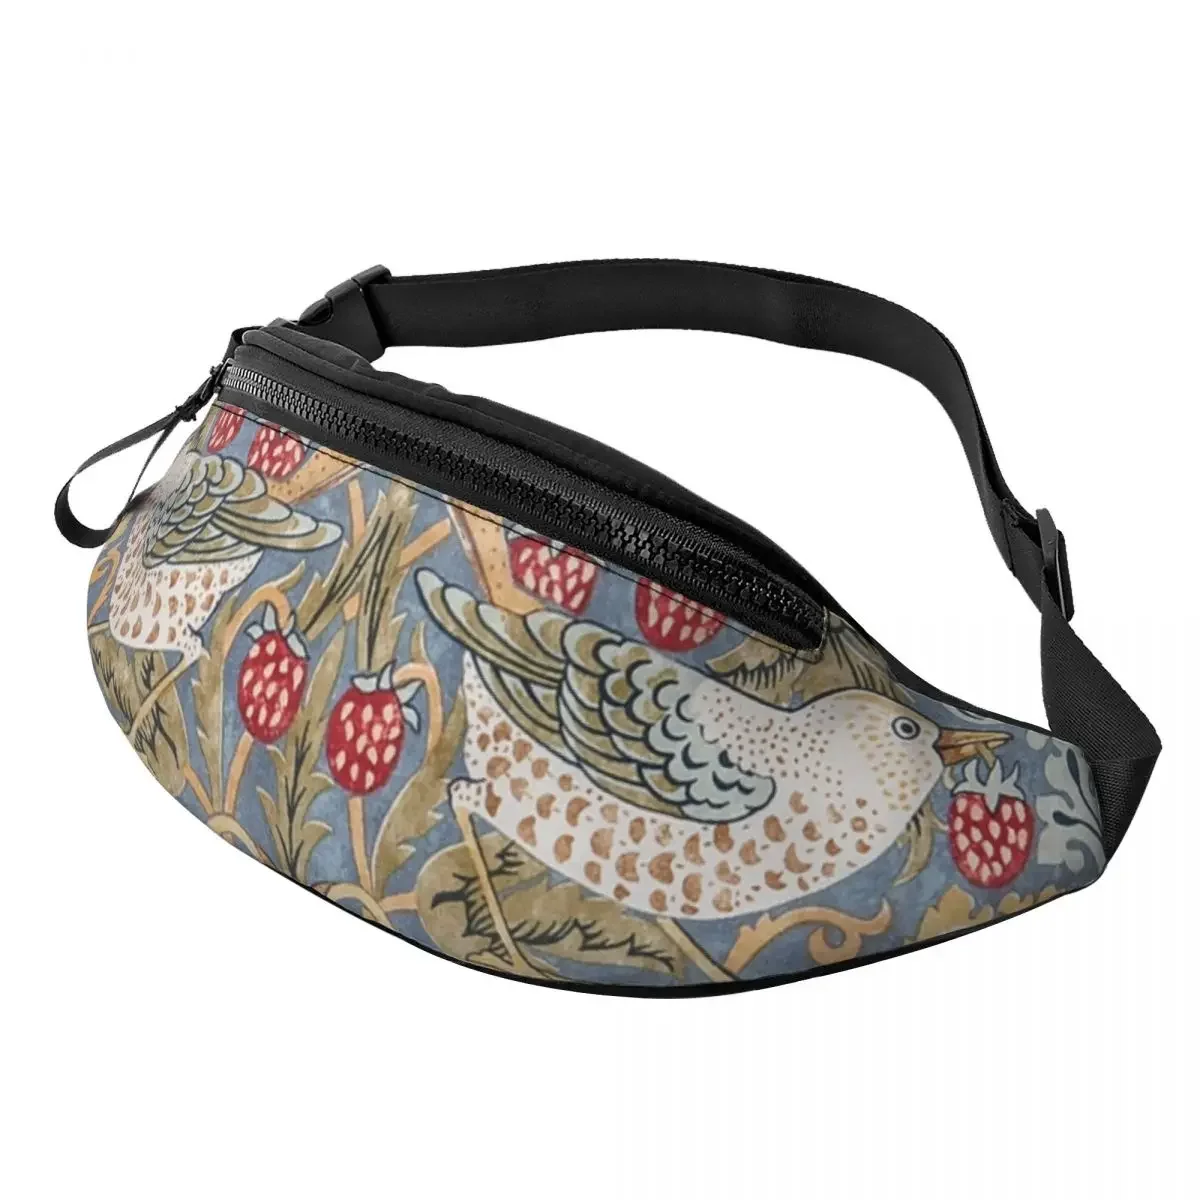 

Strawberry Thief Fanny Pack for Running Men Women William Morris Floral Textile Pattern Crossbody Waist Bag Phone Money Pouch